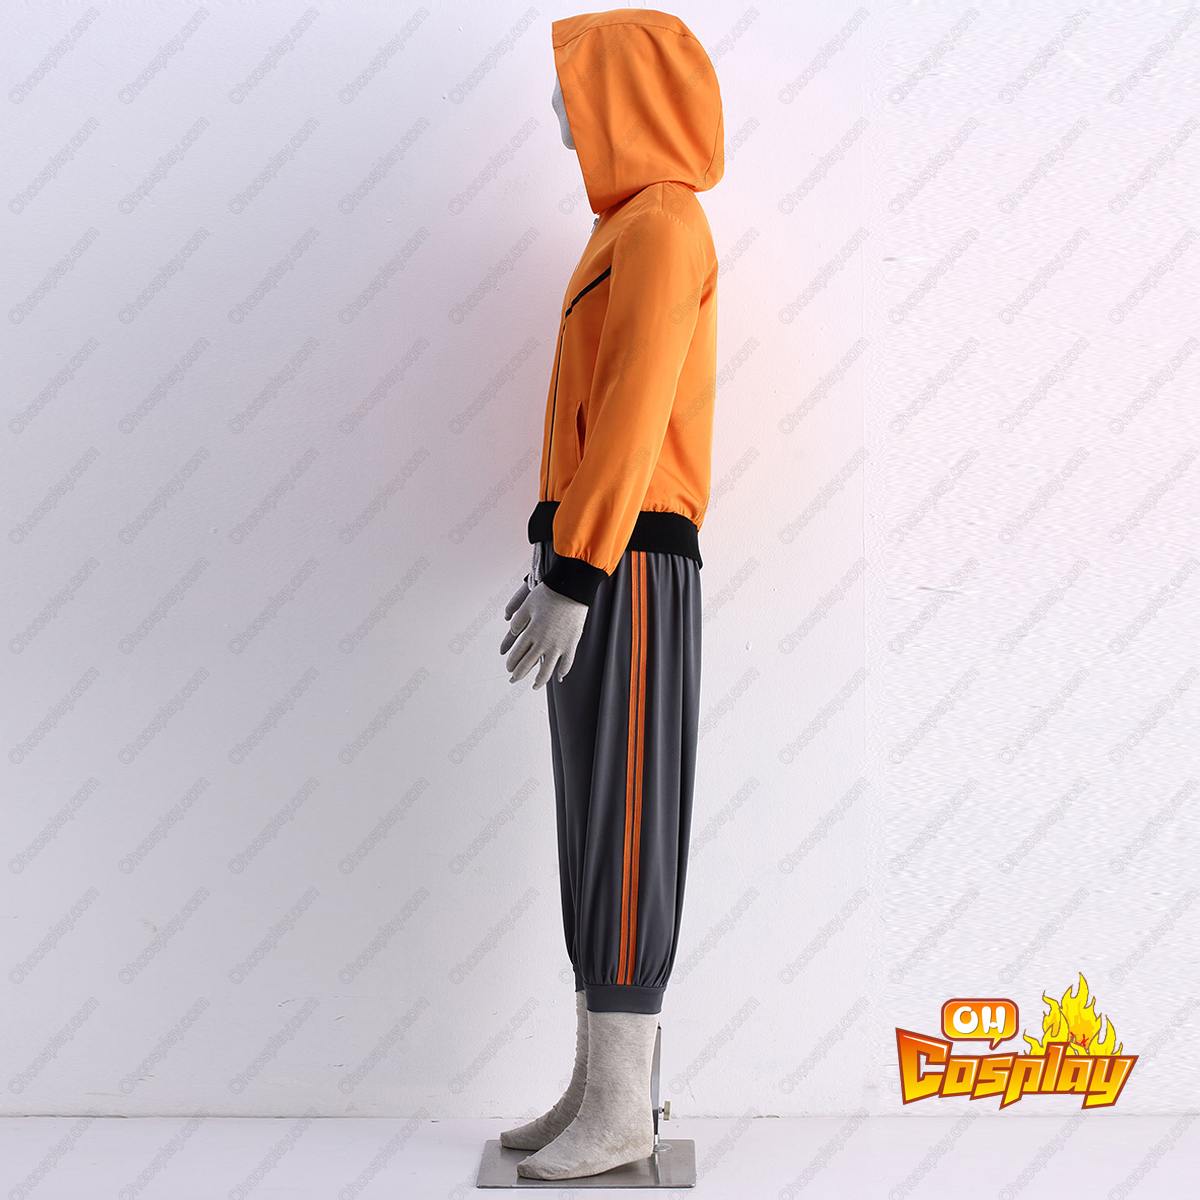 Naruto The Last Naruto 9TH Cosplay Costumes Deluxe Edition